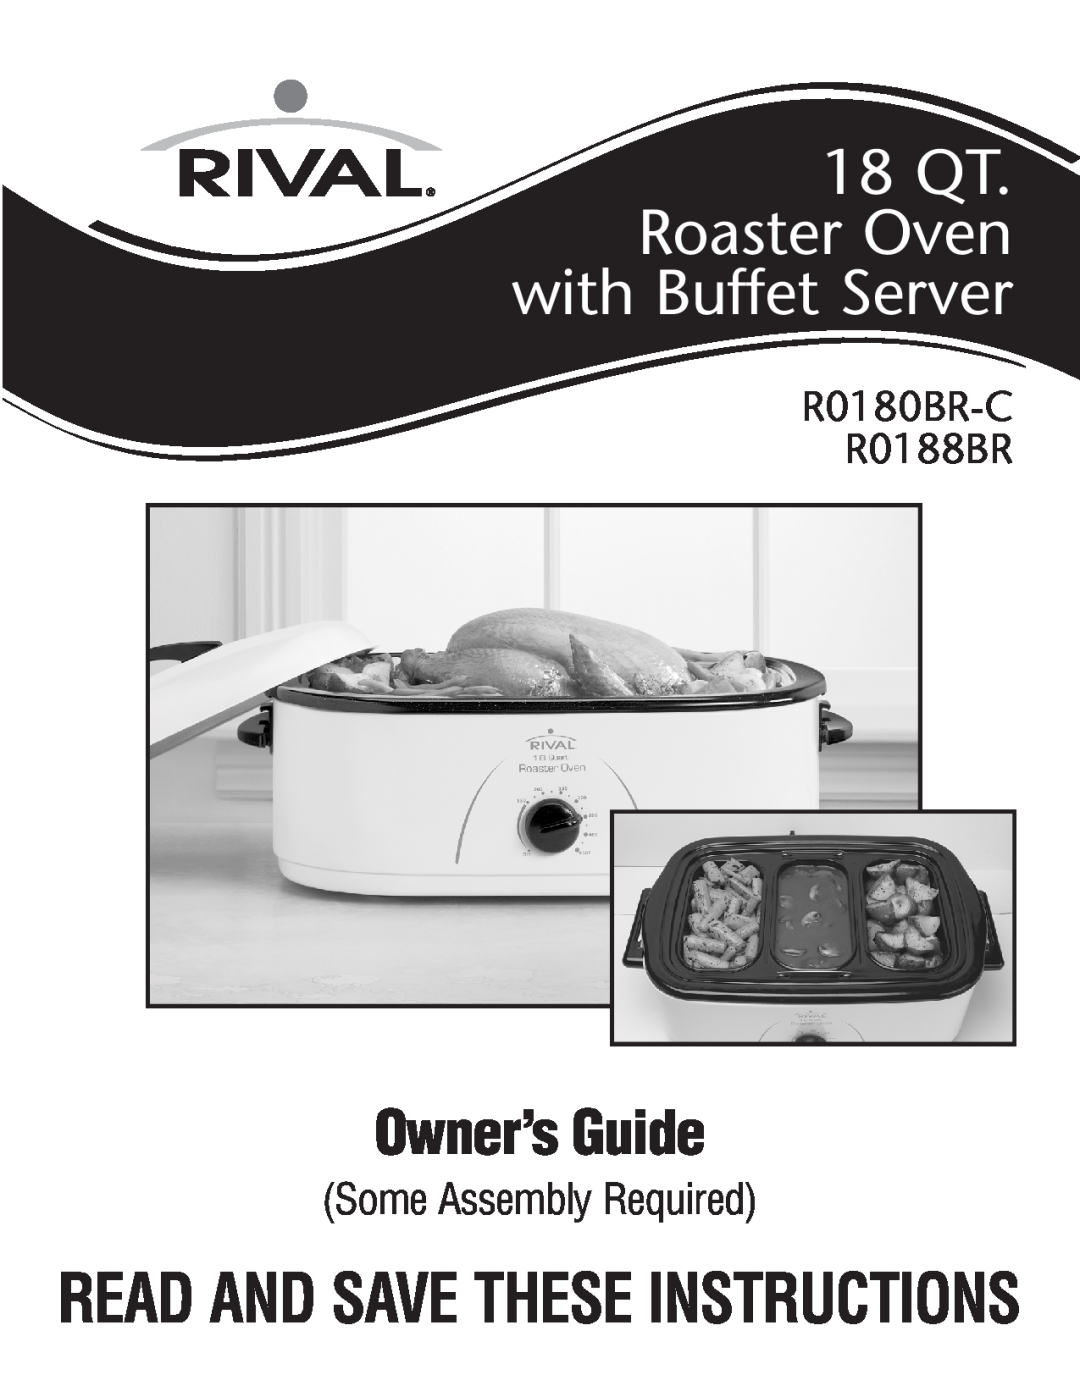 Rival R0180BR-C, R0188BR manual 18 QT. Roaster Oven with Buffet Server, Owner’sGuide, Read And Save These Instructions 